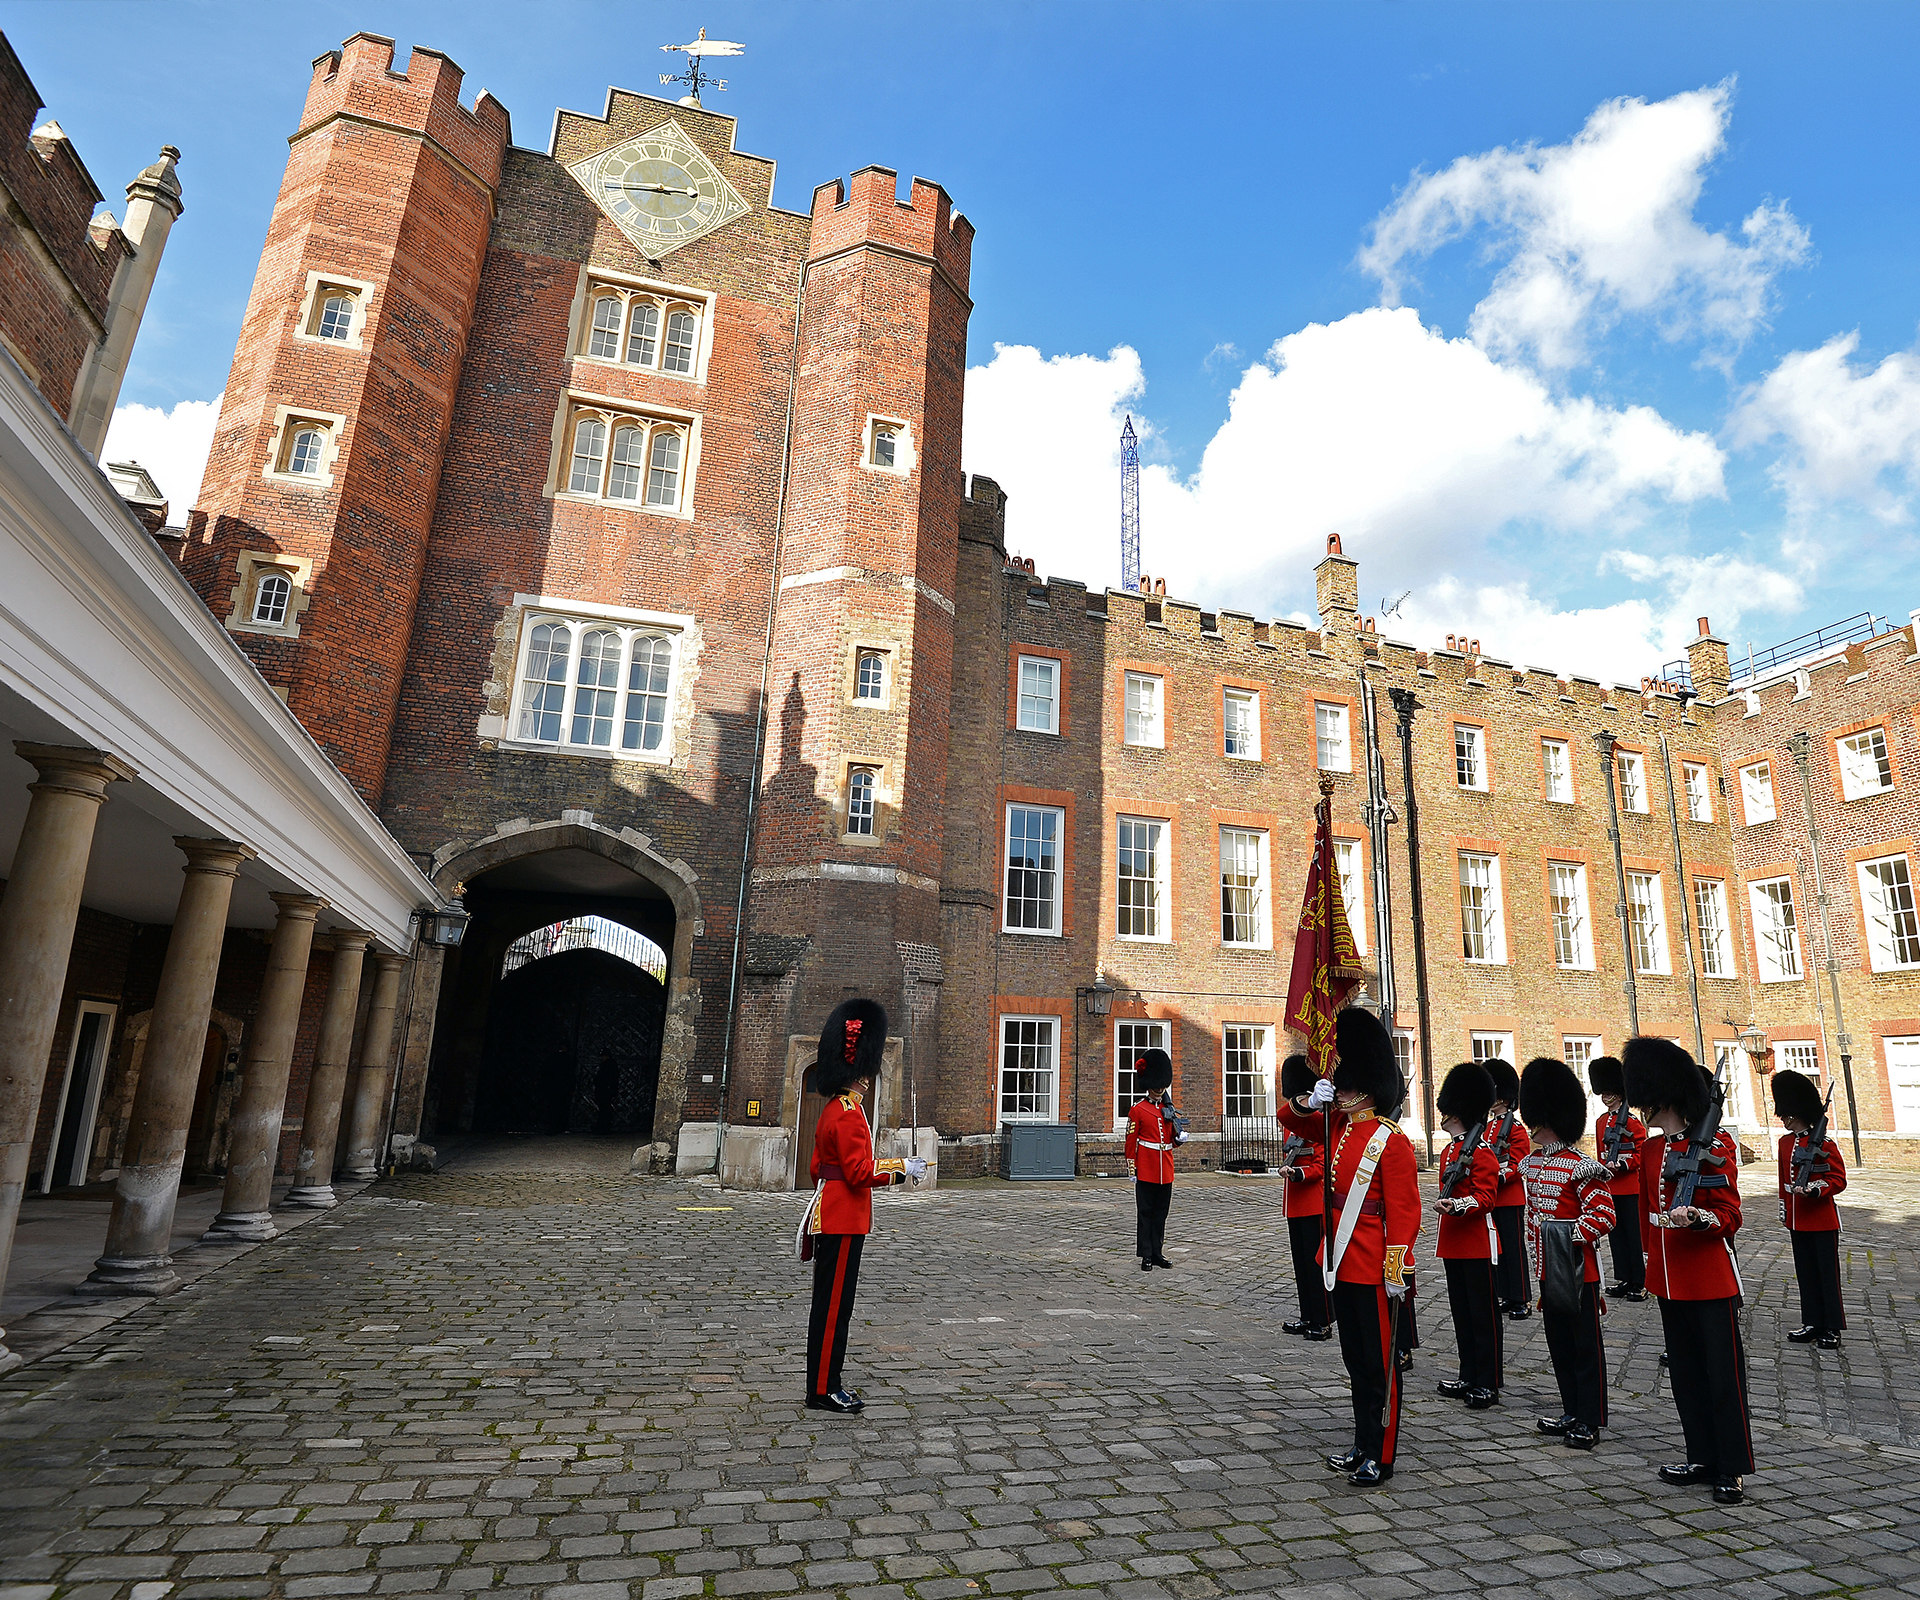 St James's Palace, homes owned by the British royal family